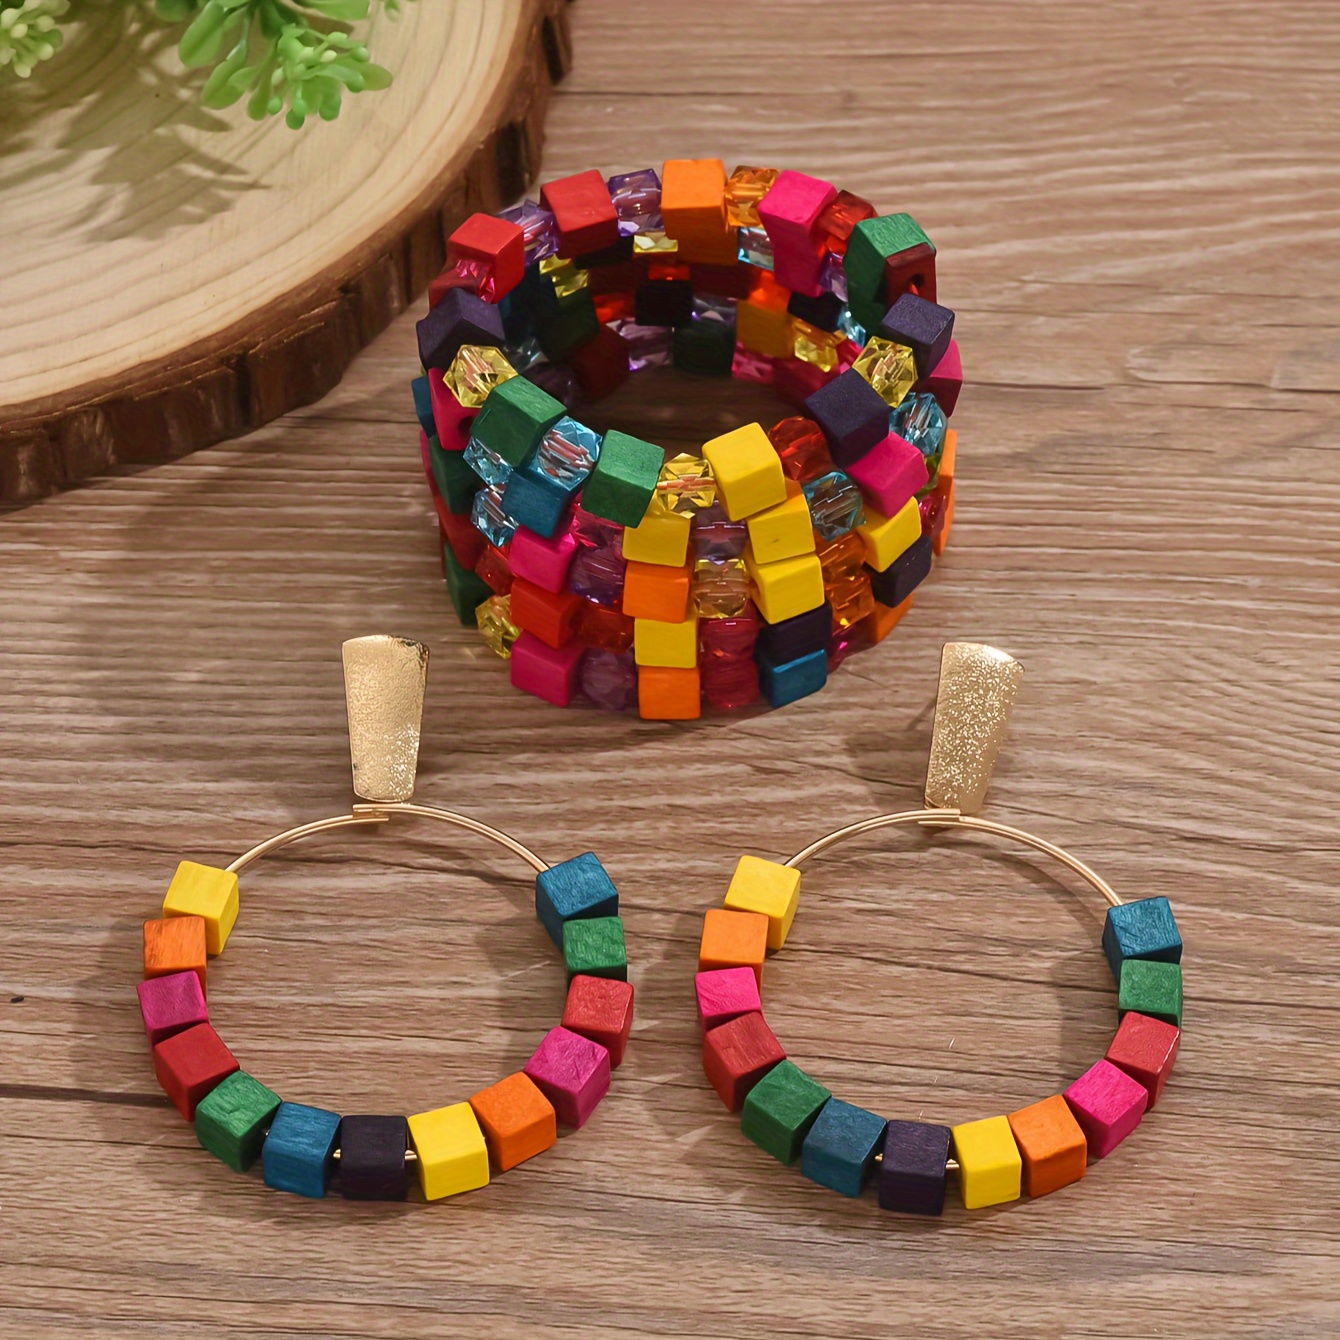 

Boho-chic 7-piece Wooden Bead Jewelry Set With Colorful Bracelets & Hoop Earrings - Perfect For Daily Wear, Beach Parties, And Music Festivals Boho Jewelry For Women Bohemian Jewelry